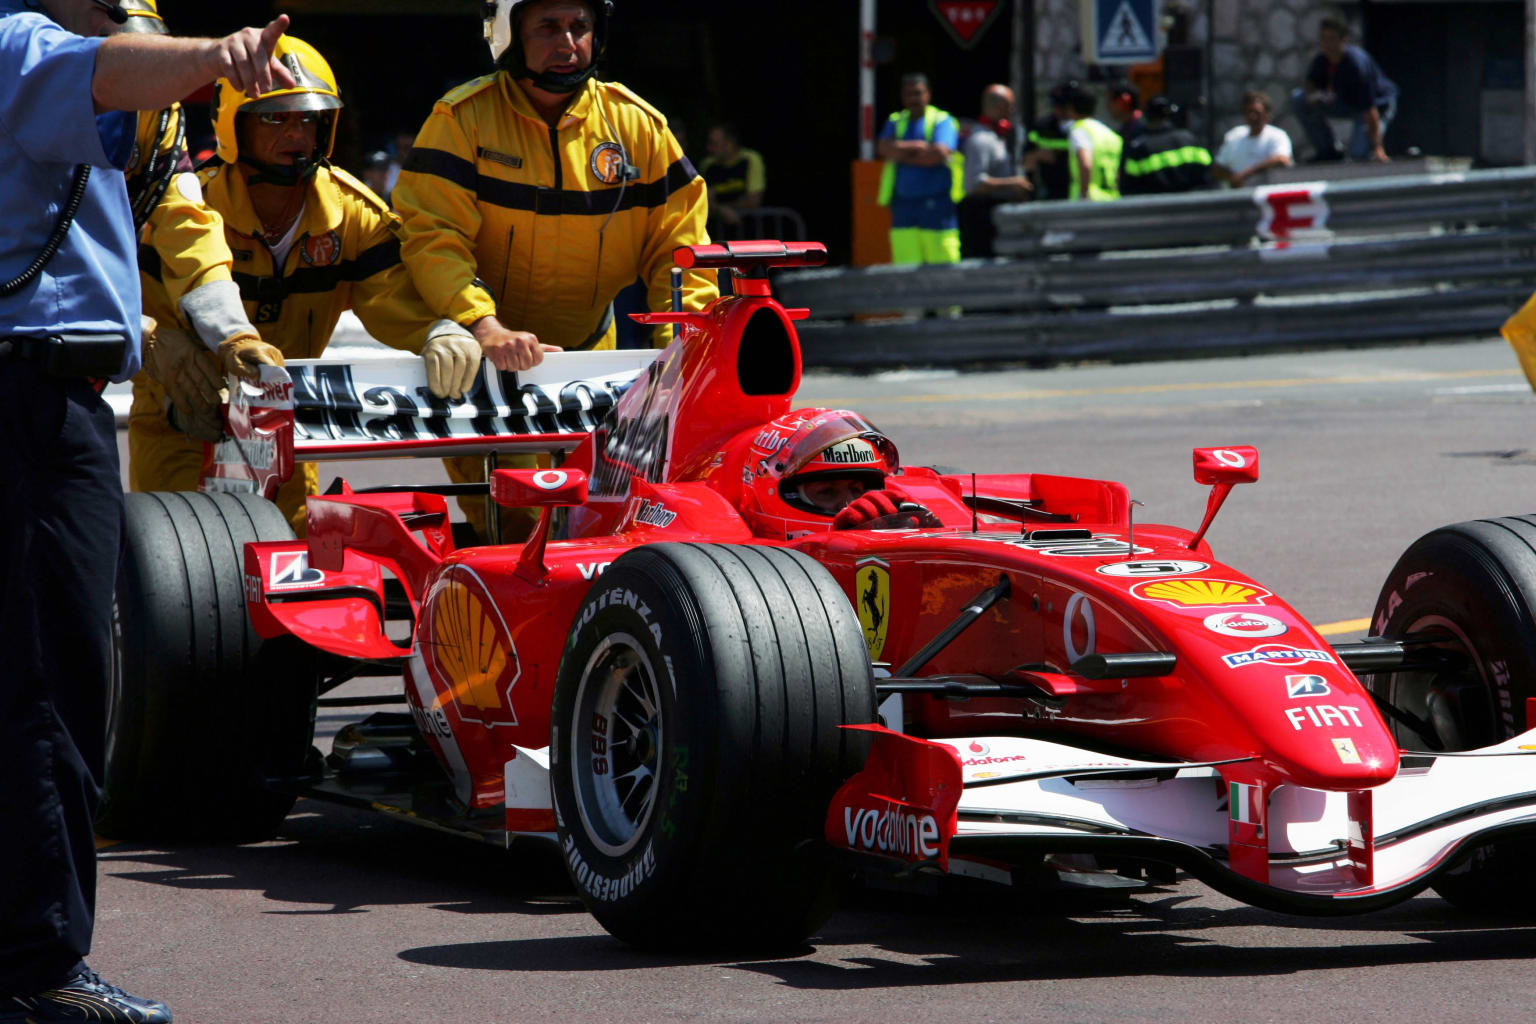 Michael Schumacher brought out the yellow flags after stopping his car on purpose during the 2006 Monaco Grand Prix qualifying session